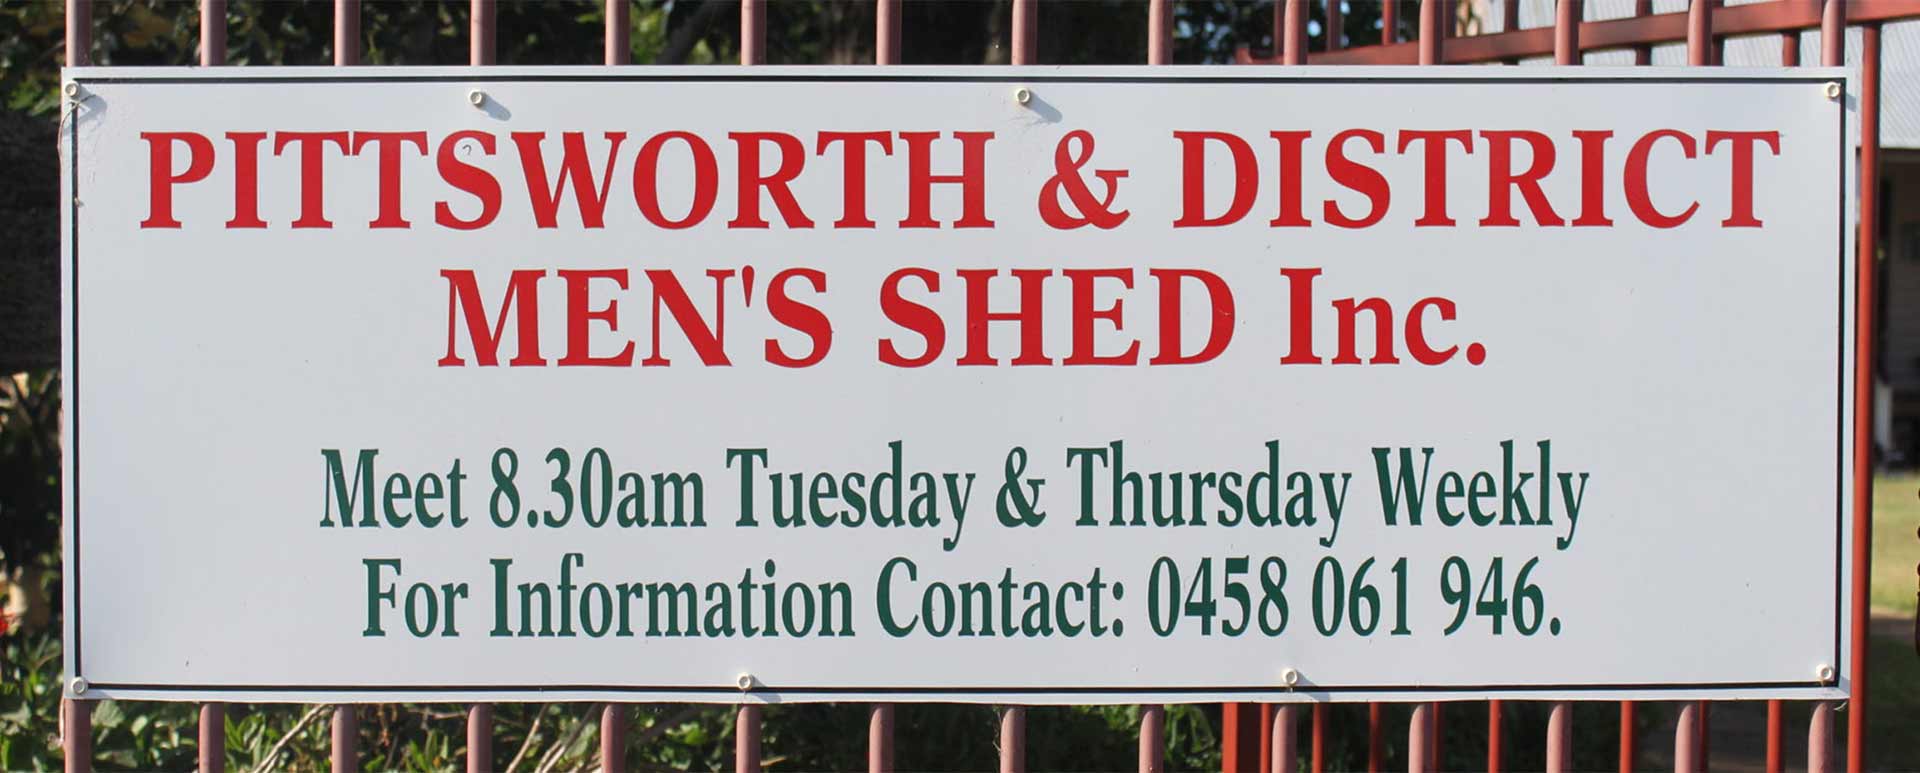 Pittsworth & District Men's Shed Inc. Sign